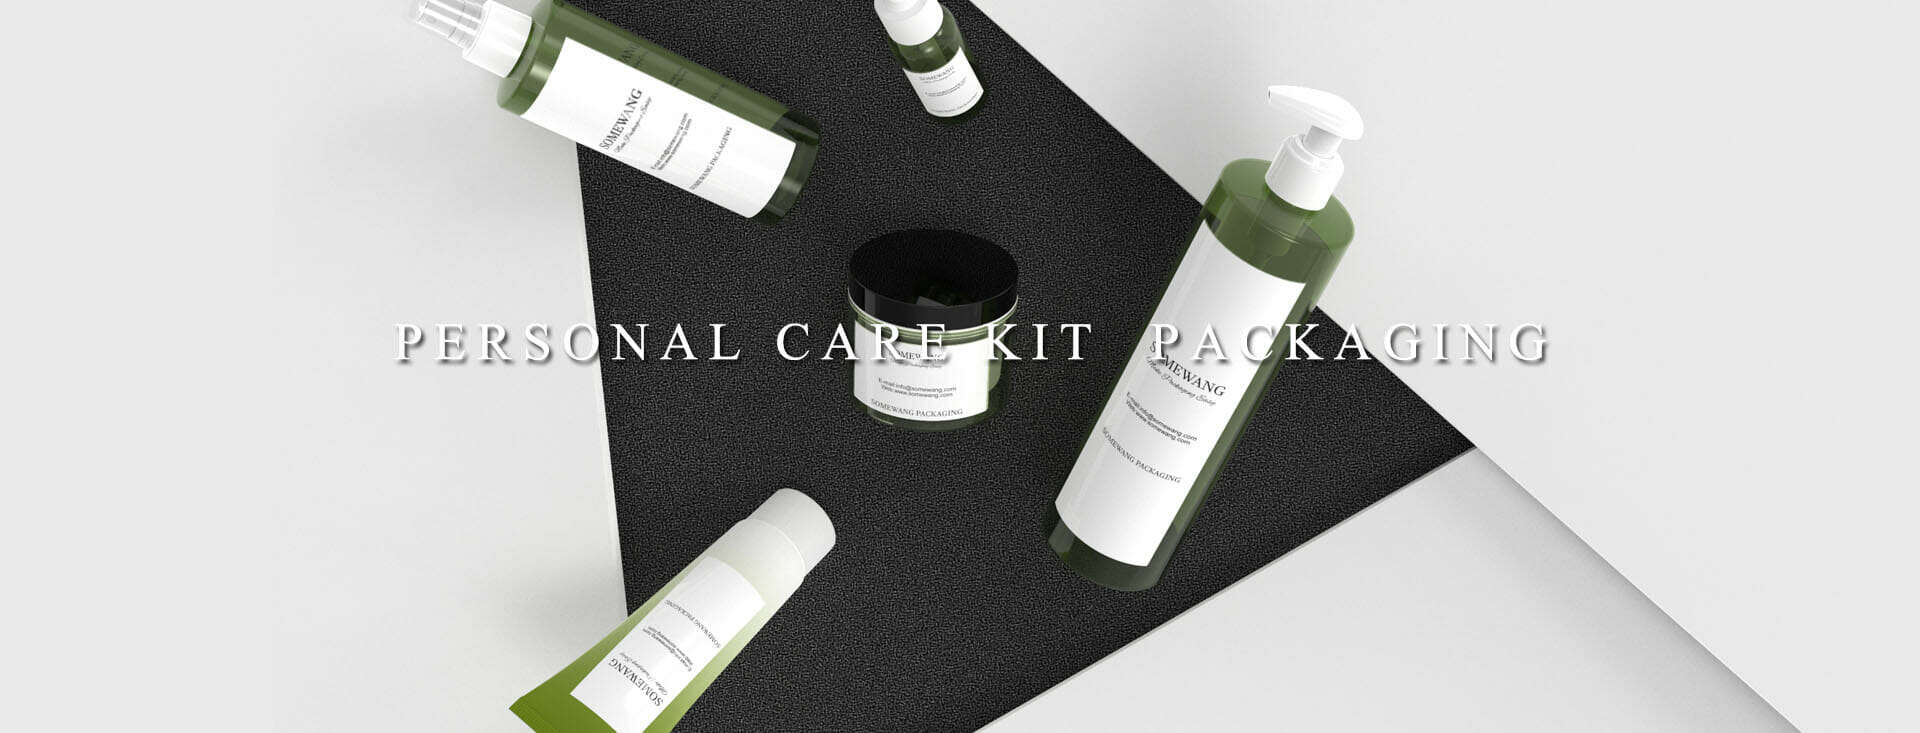 personal care kit packaging